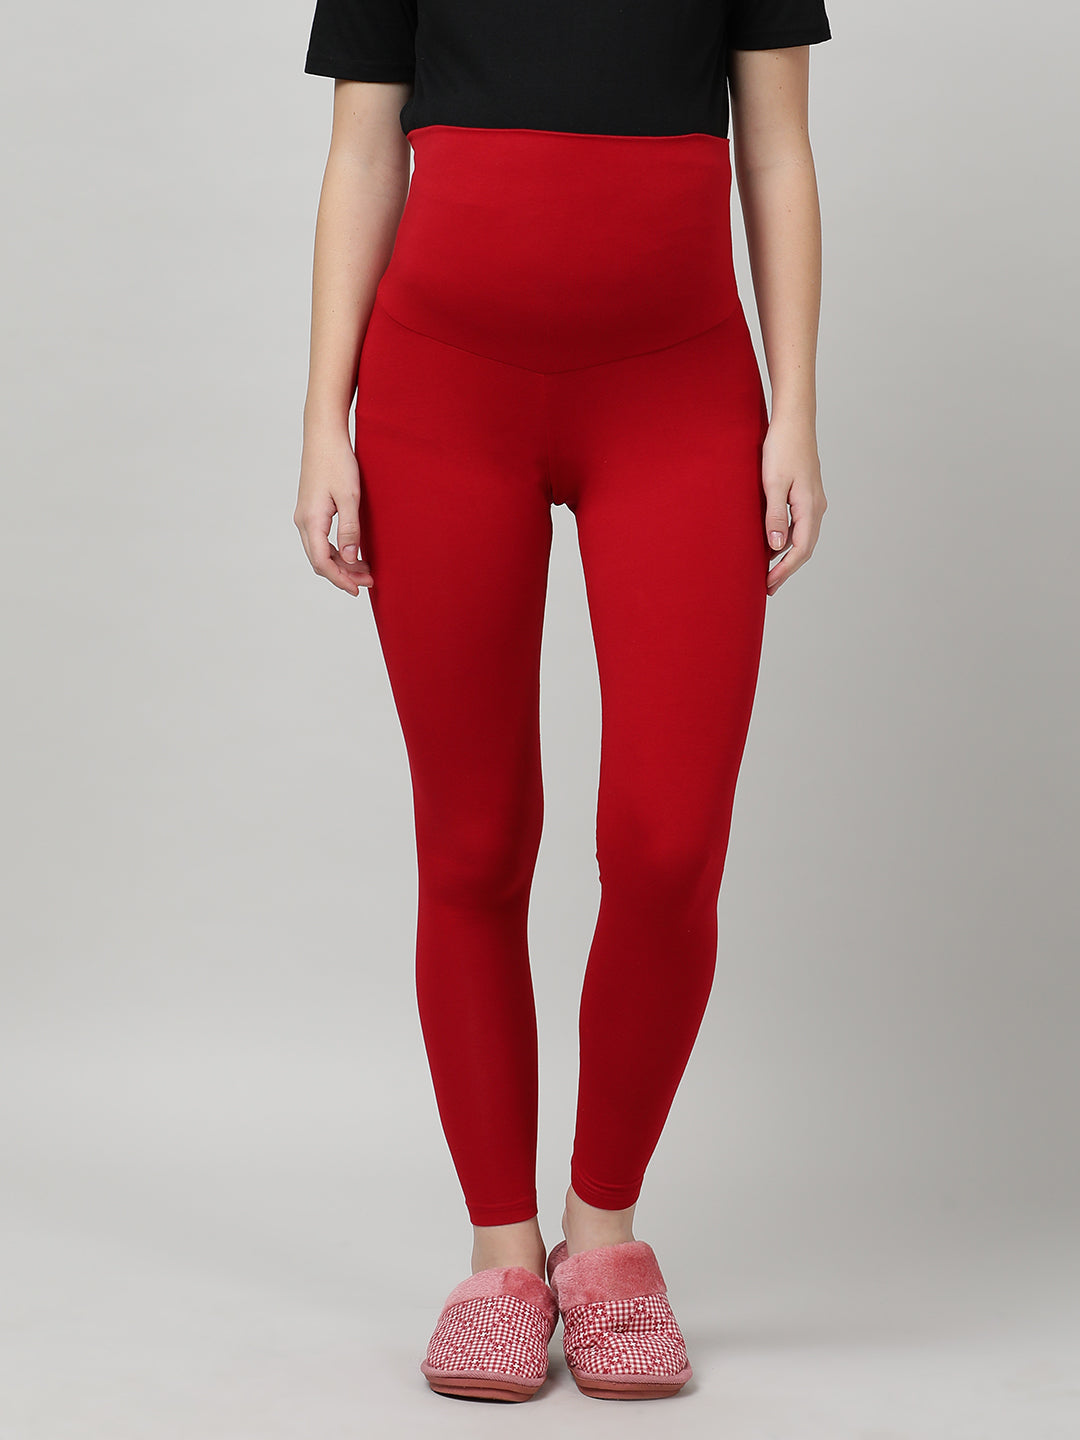 SOFT TOUCH - MATERNITY PANT